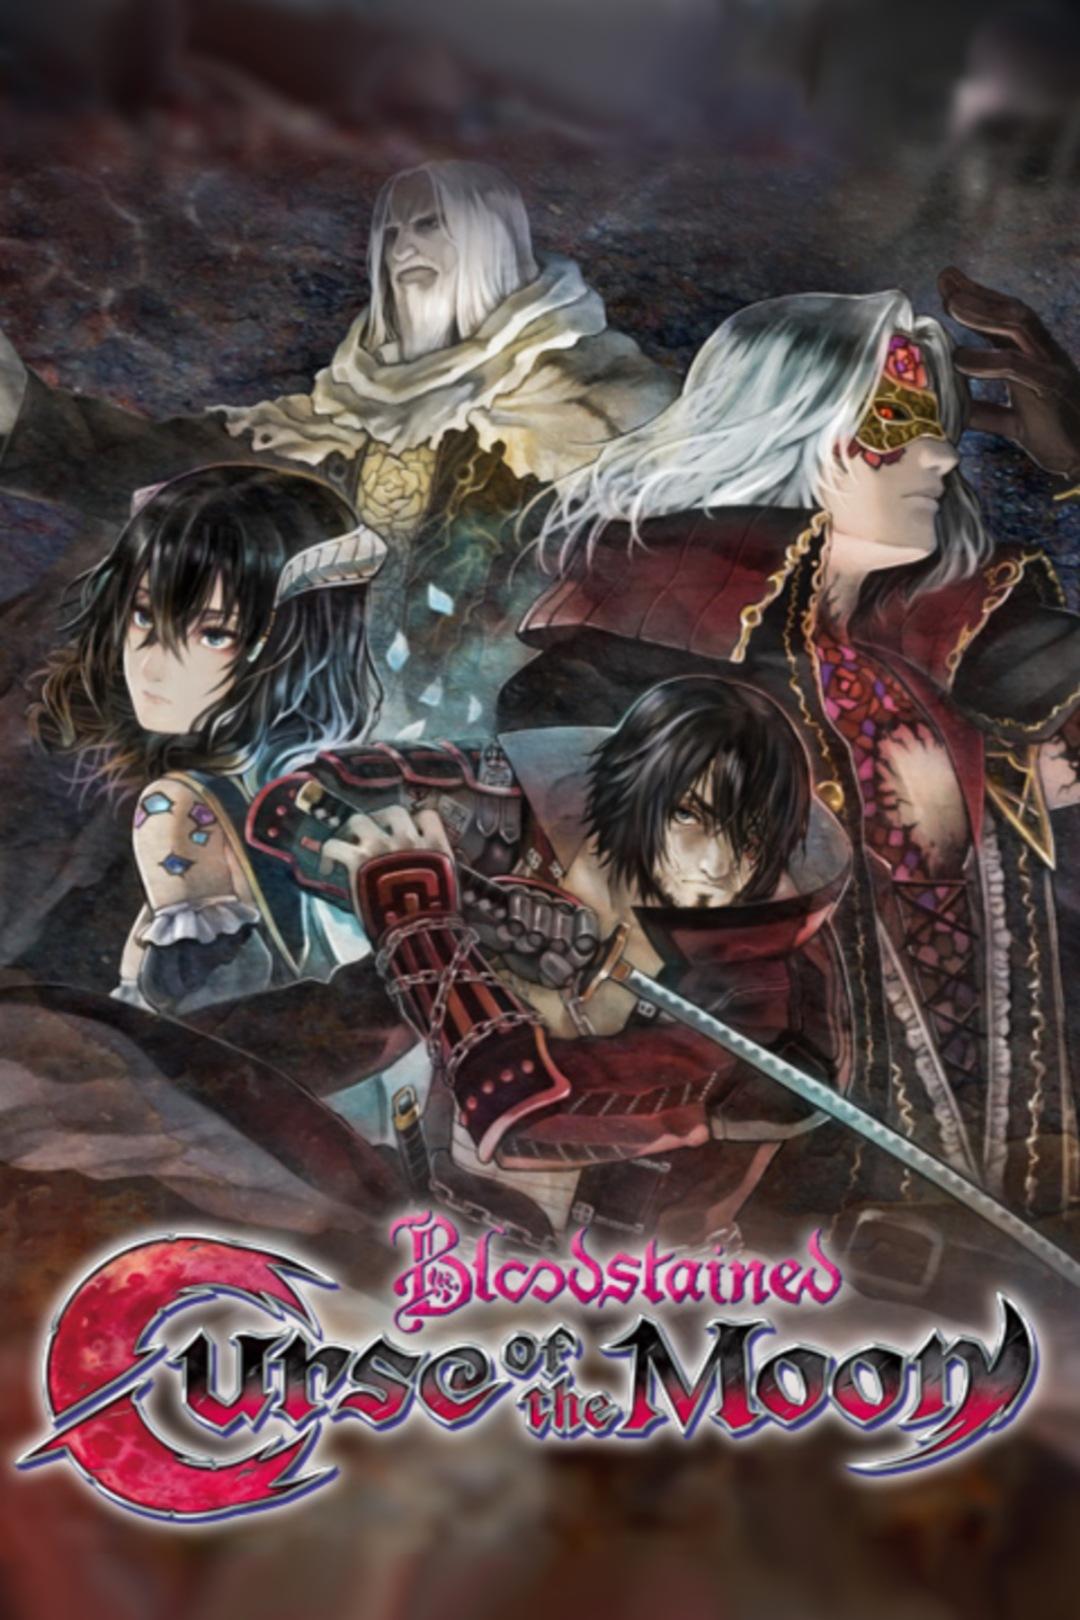 Bloodstained Wallpapers